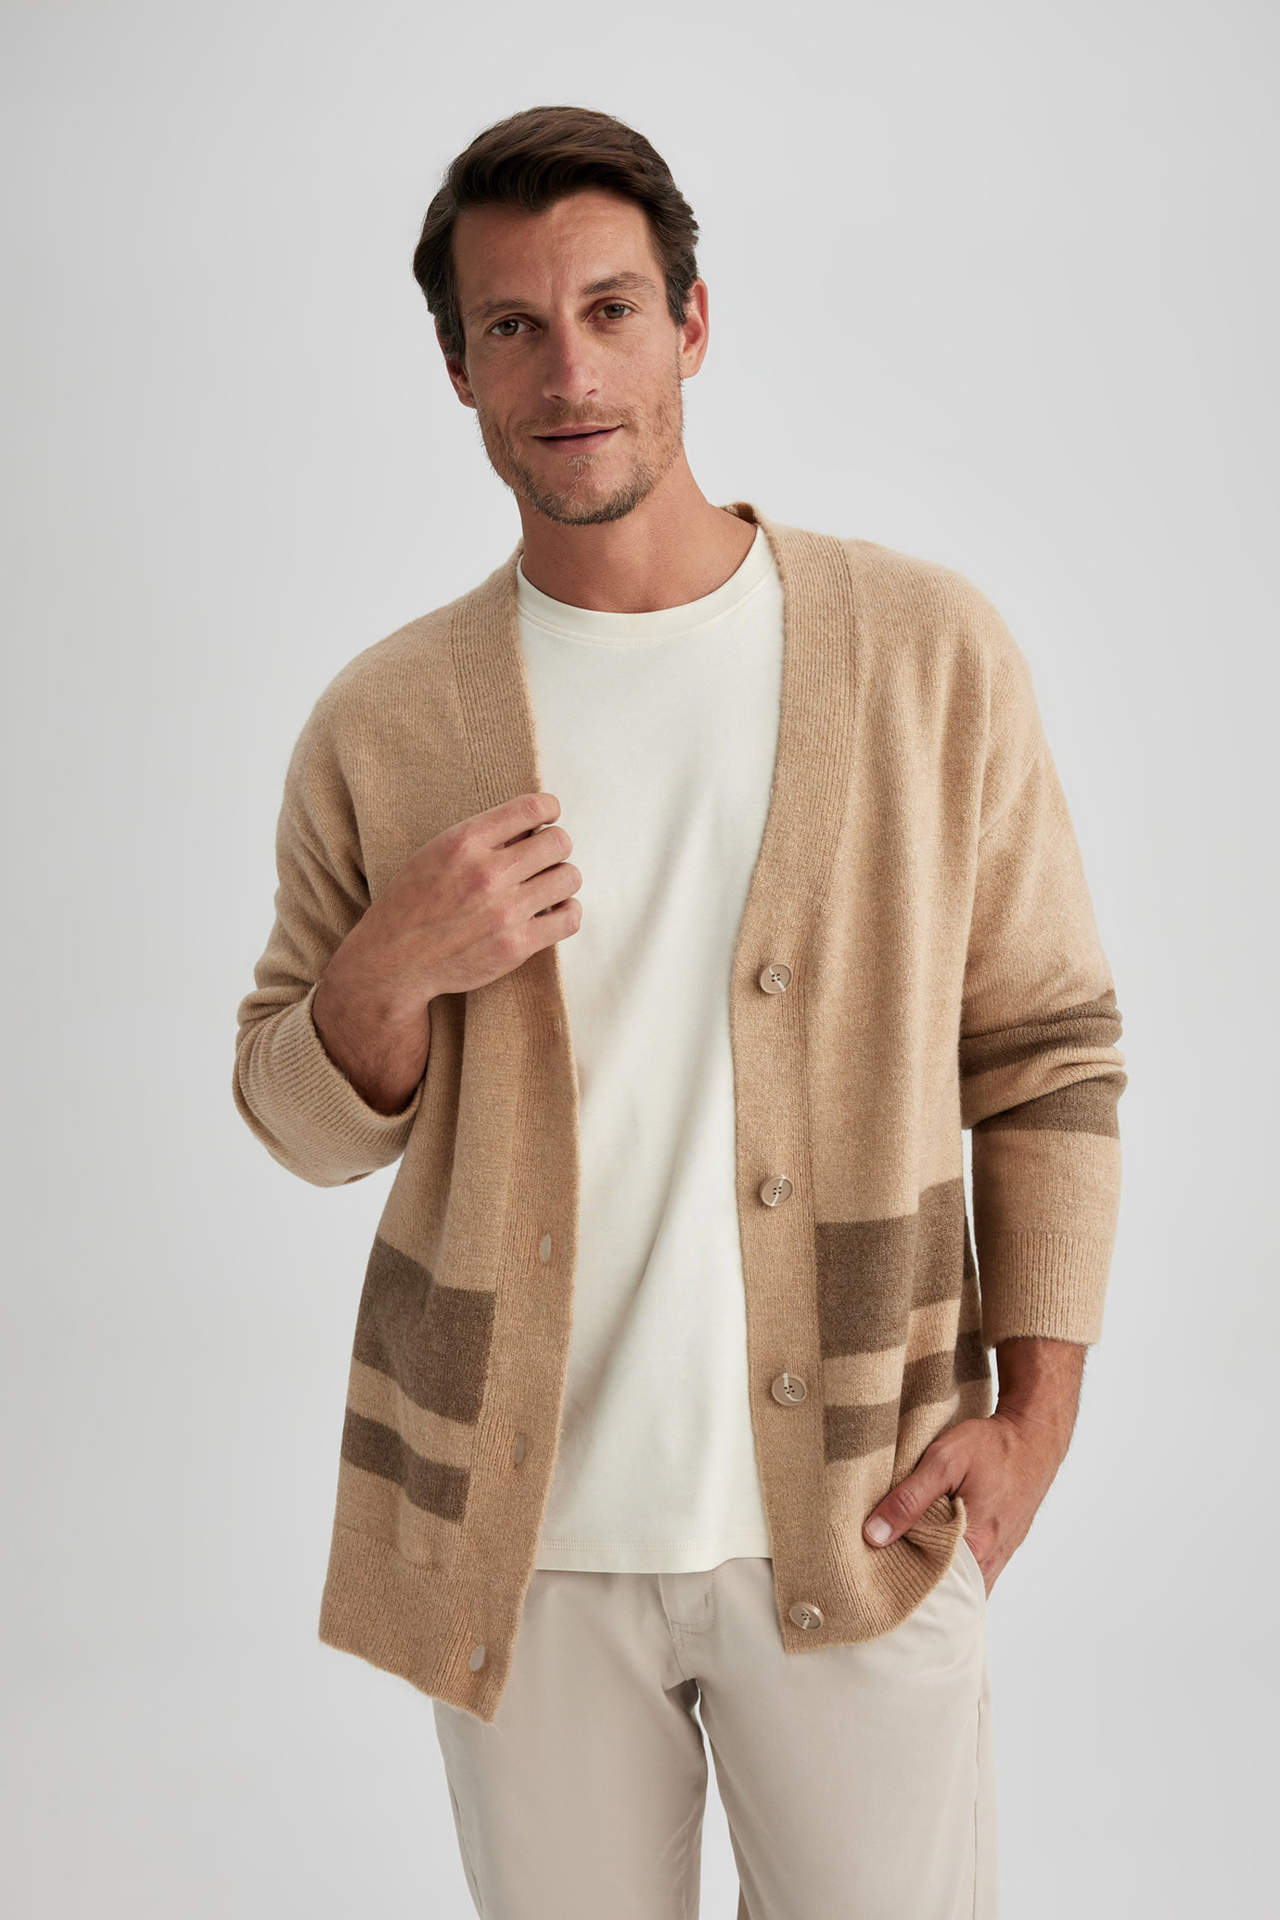 DEFACTO Relax Fit V-Neck Knitwear Cardigan